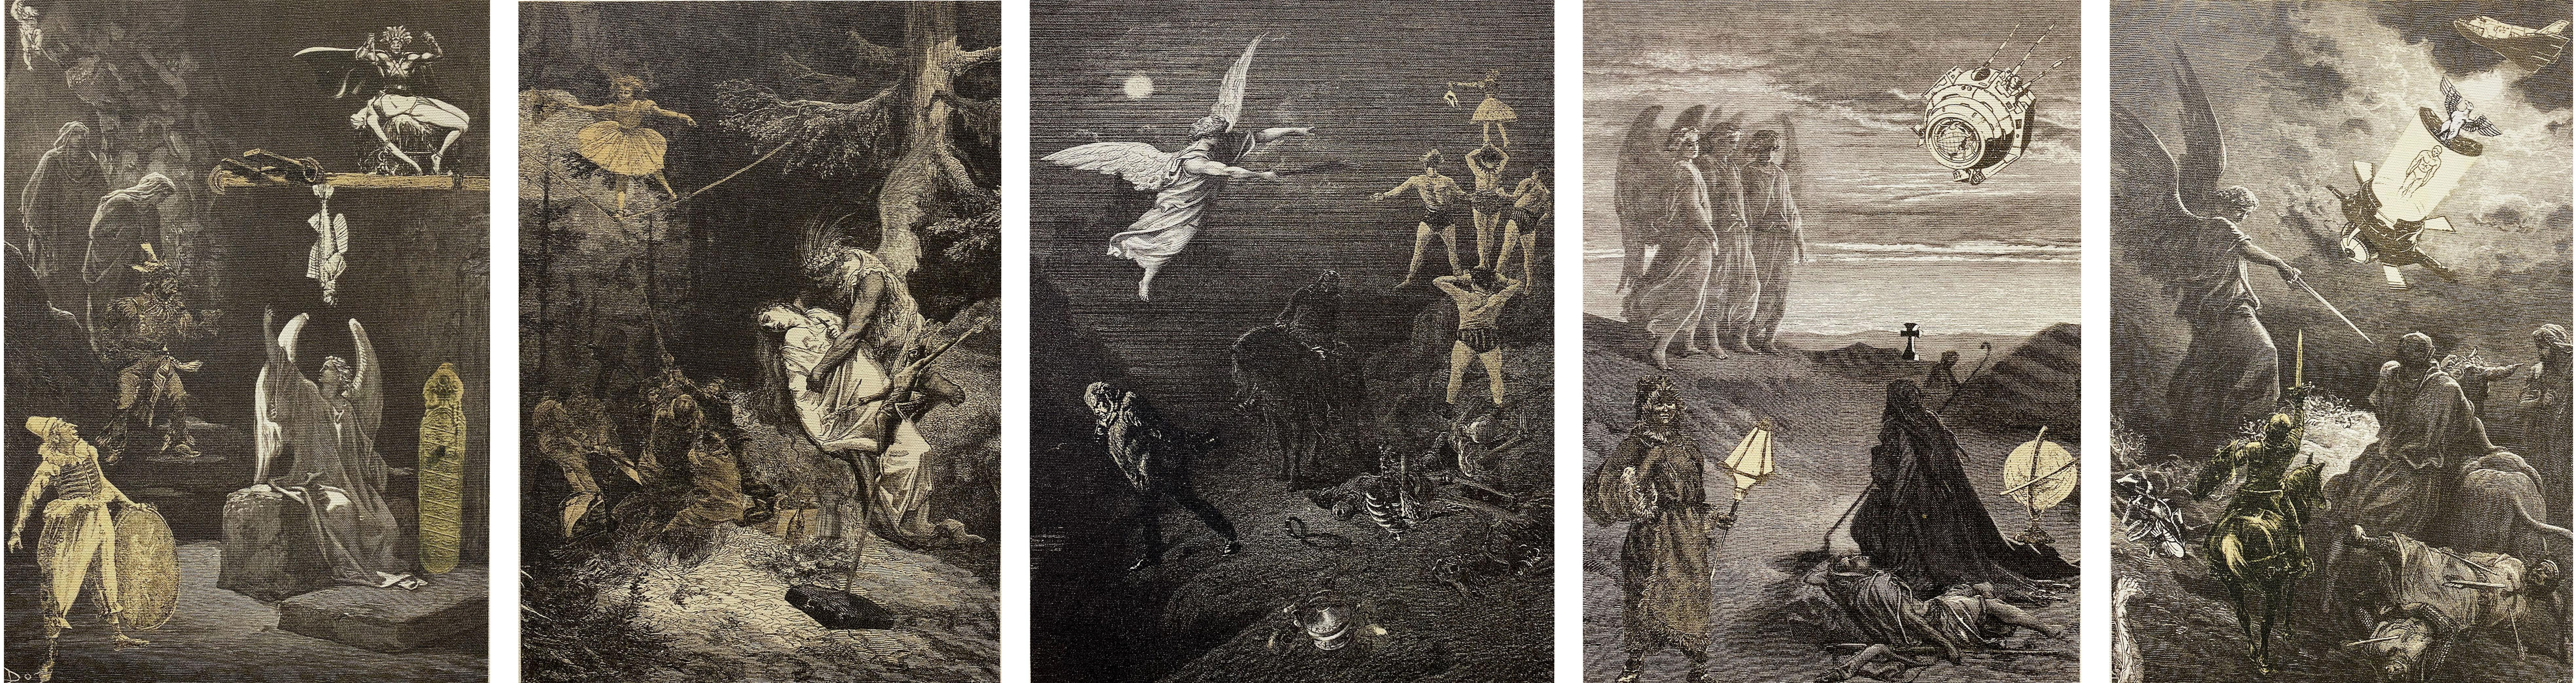 UV Print on Canvas / 5 Edition

Rafet Arslan produced this series as a handmade collage in 2010, using Gustav Dore's two series titled 'Angels and the Dead' as a backdrop. He created his own story on the floors with pieces he selected from his own